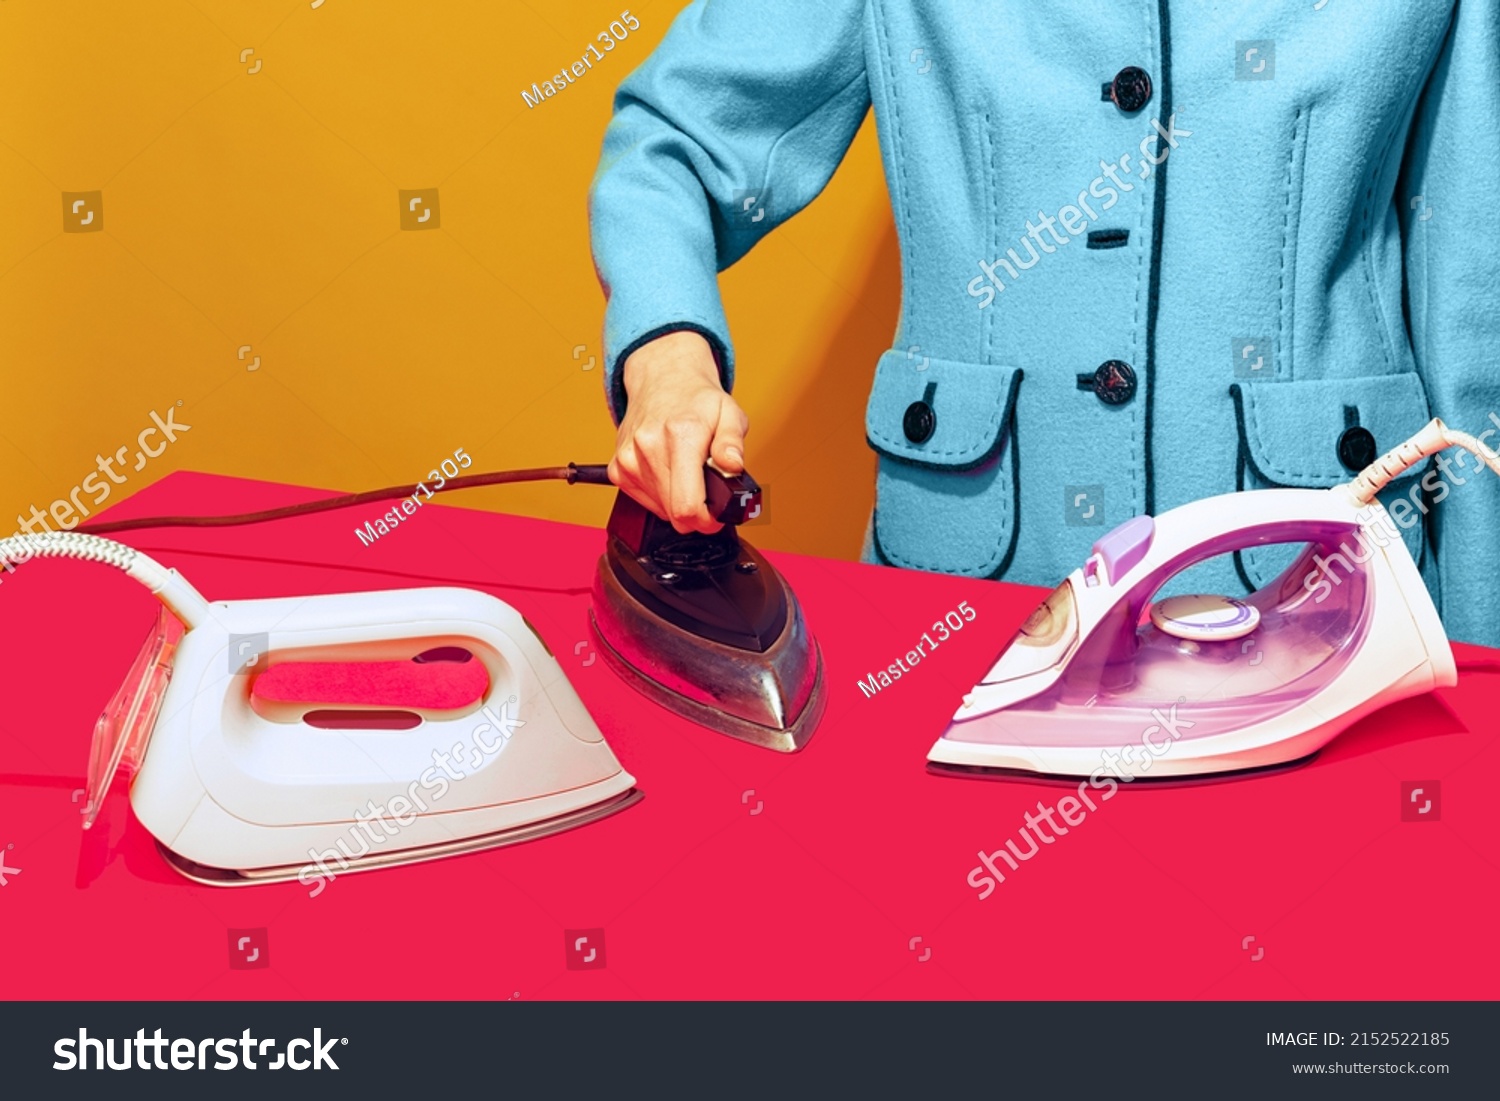 Colorful bright image of female ironing pink tablecloth with retro iron isolated over yellow background. Modern devices and retro things. Concept of vintage pop art, mix of times. Copy space for ad #2152522185